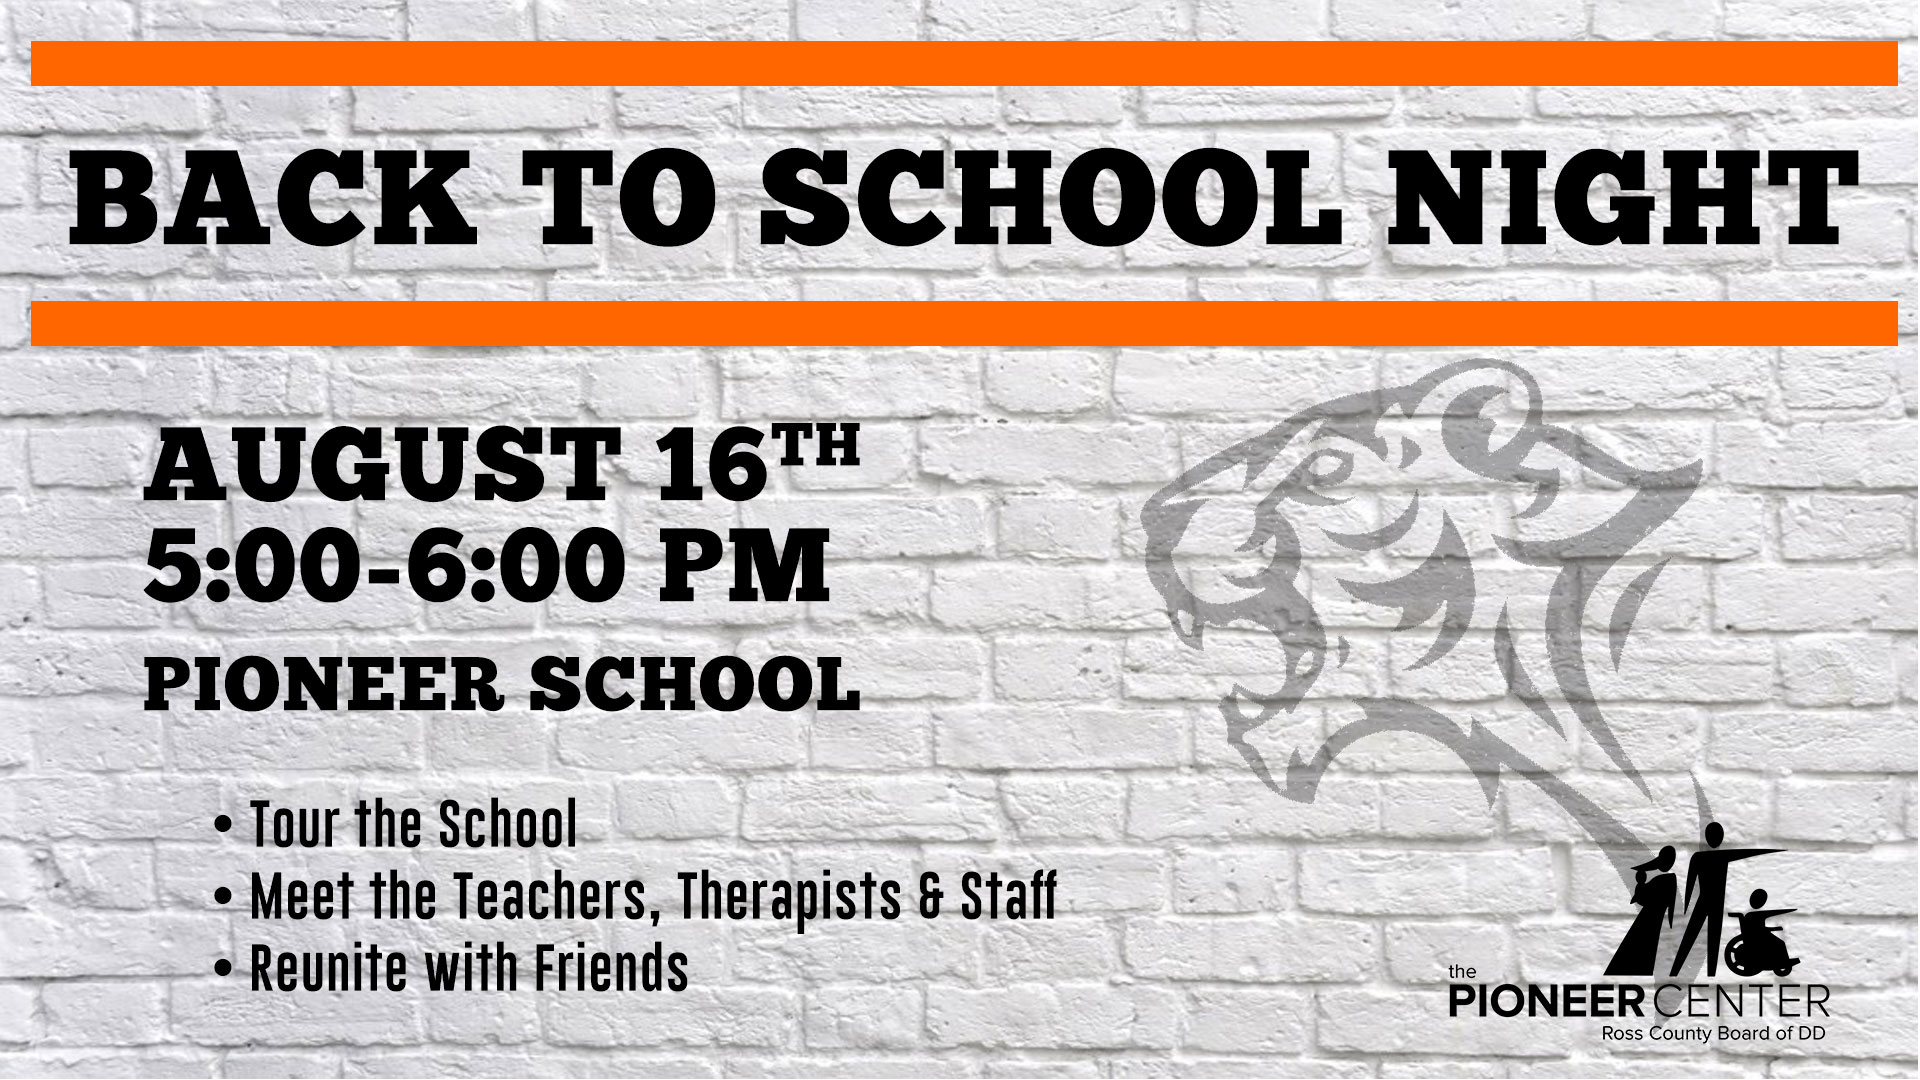 Back to School at Pioneer